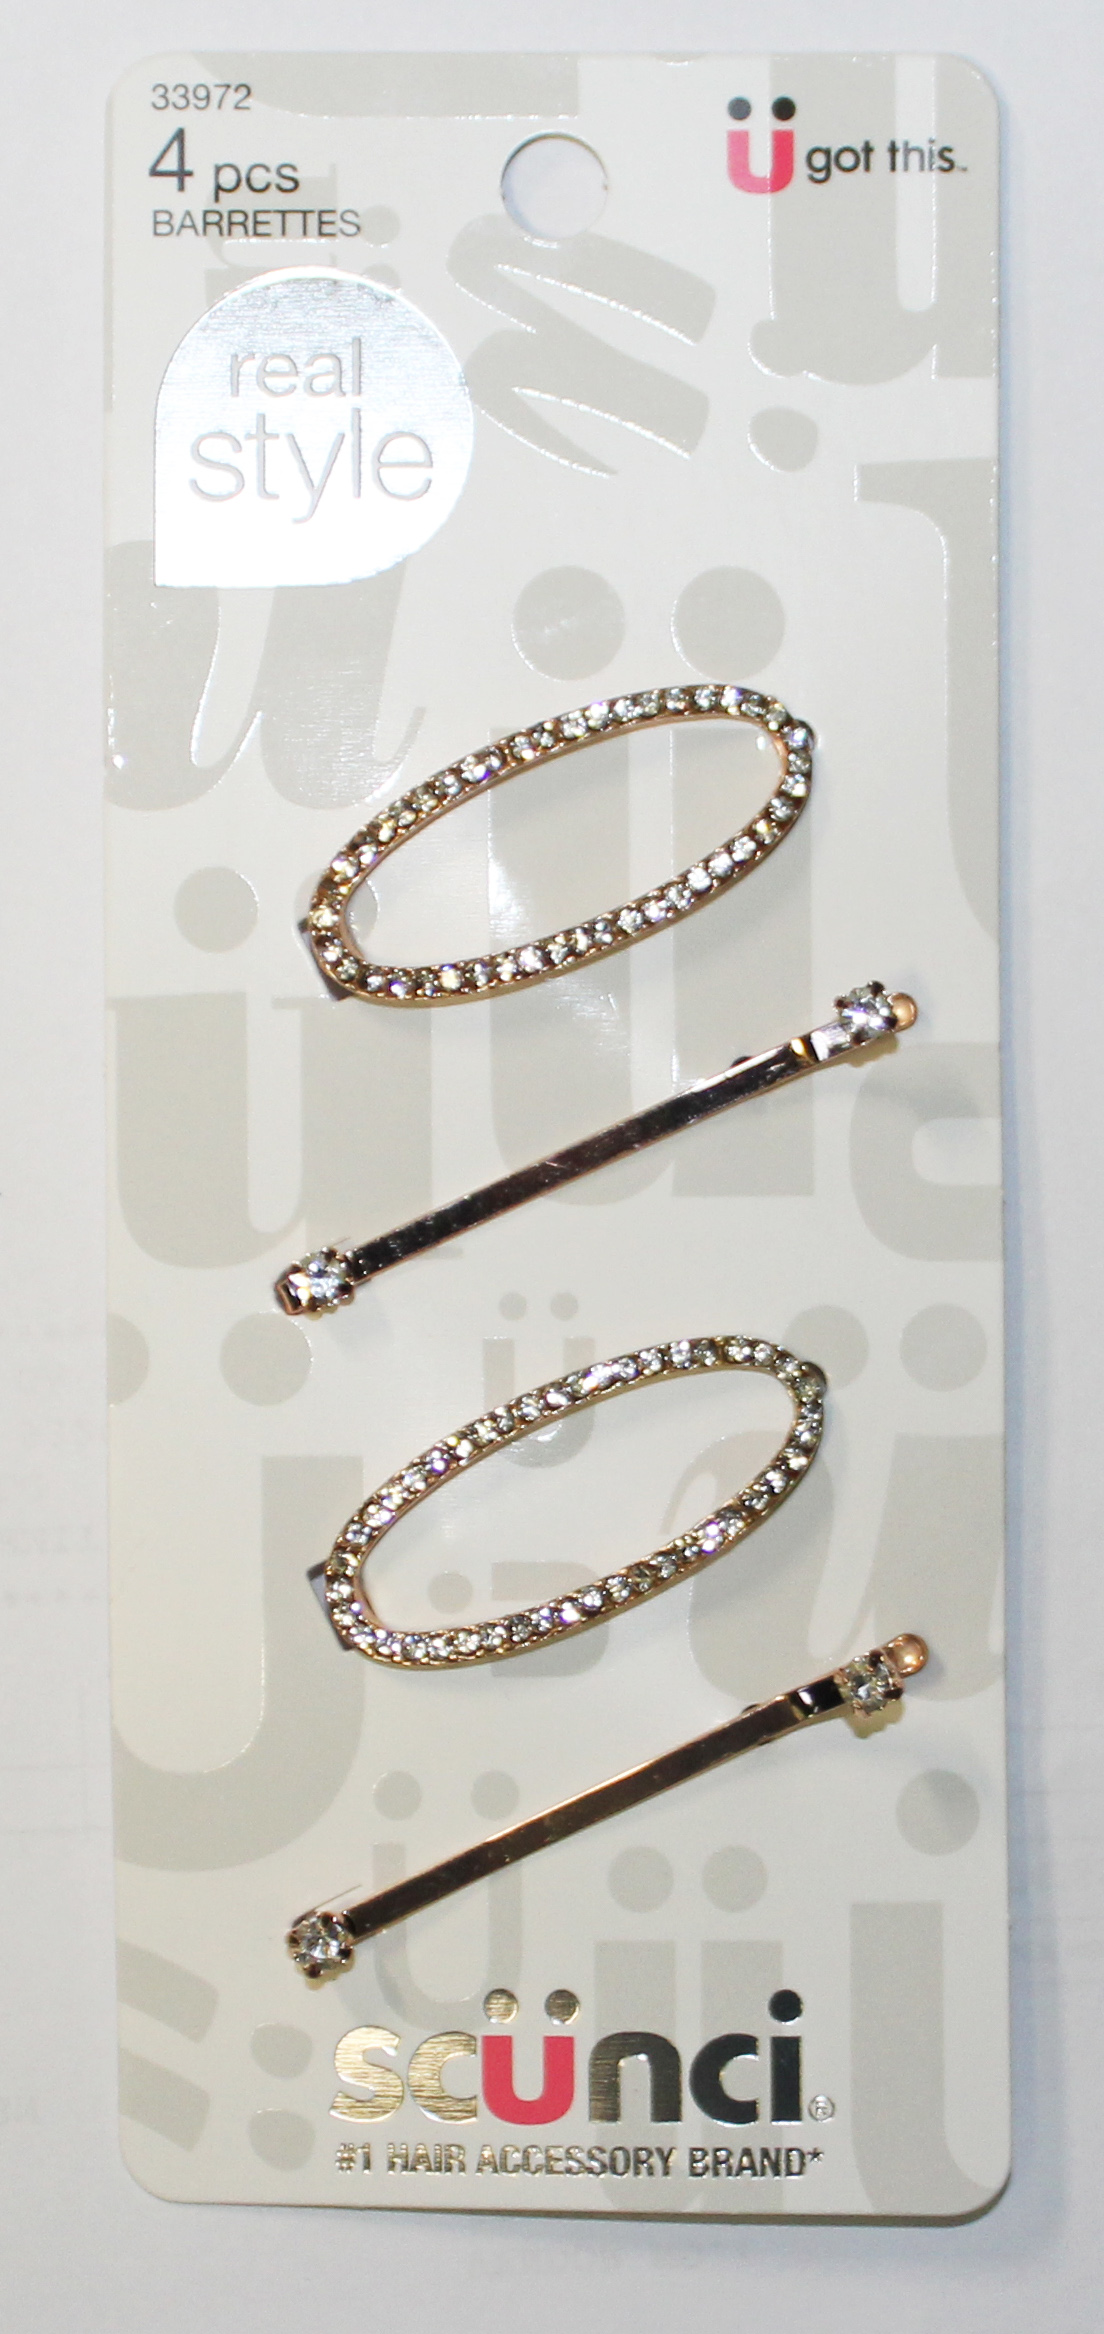 Scunci Bling Bobby Pin & Barrette, 4 Count Pack